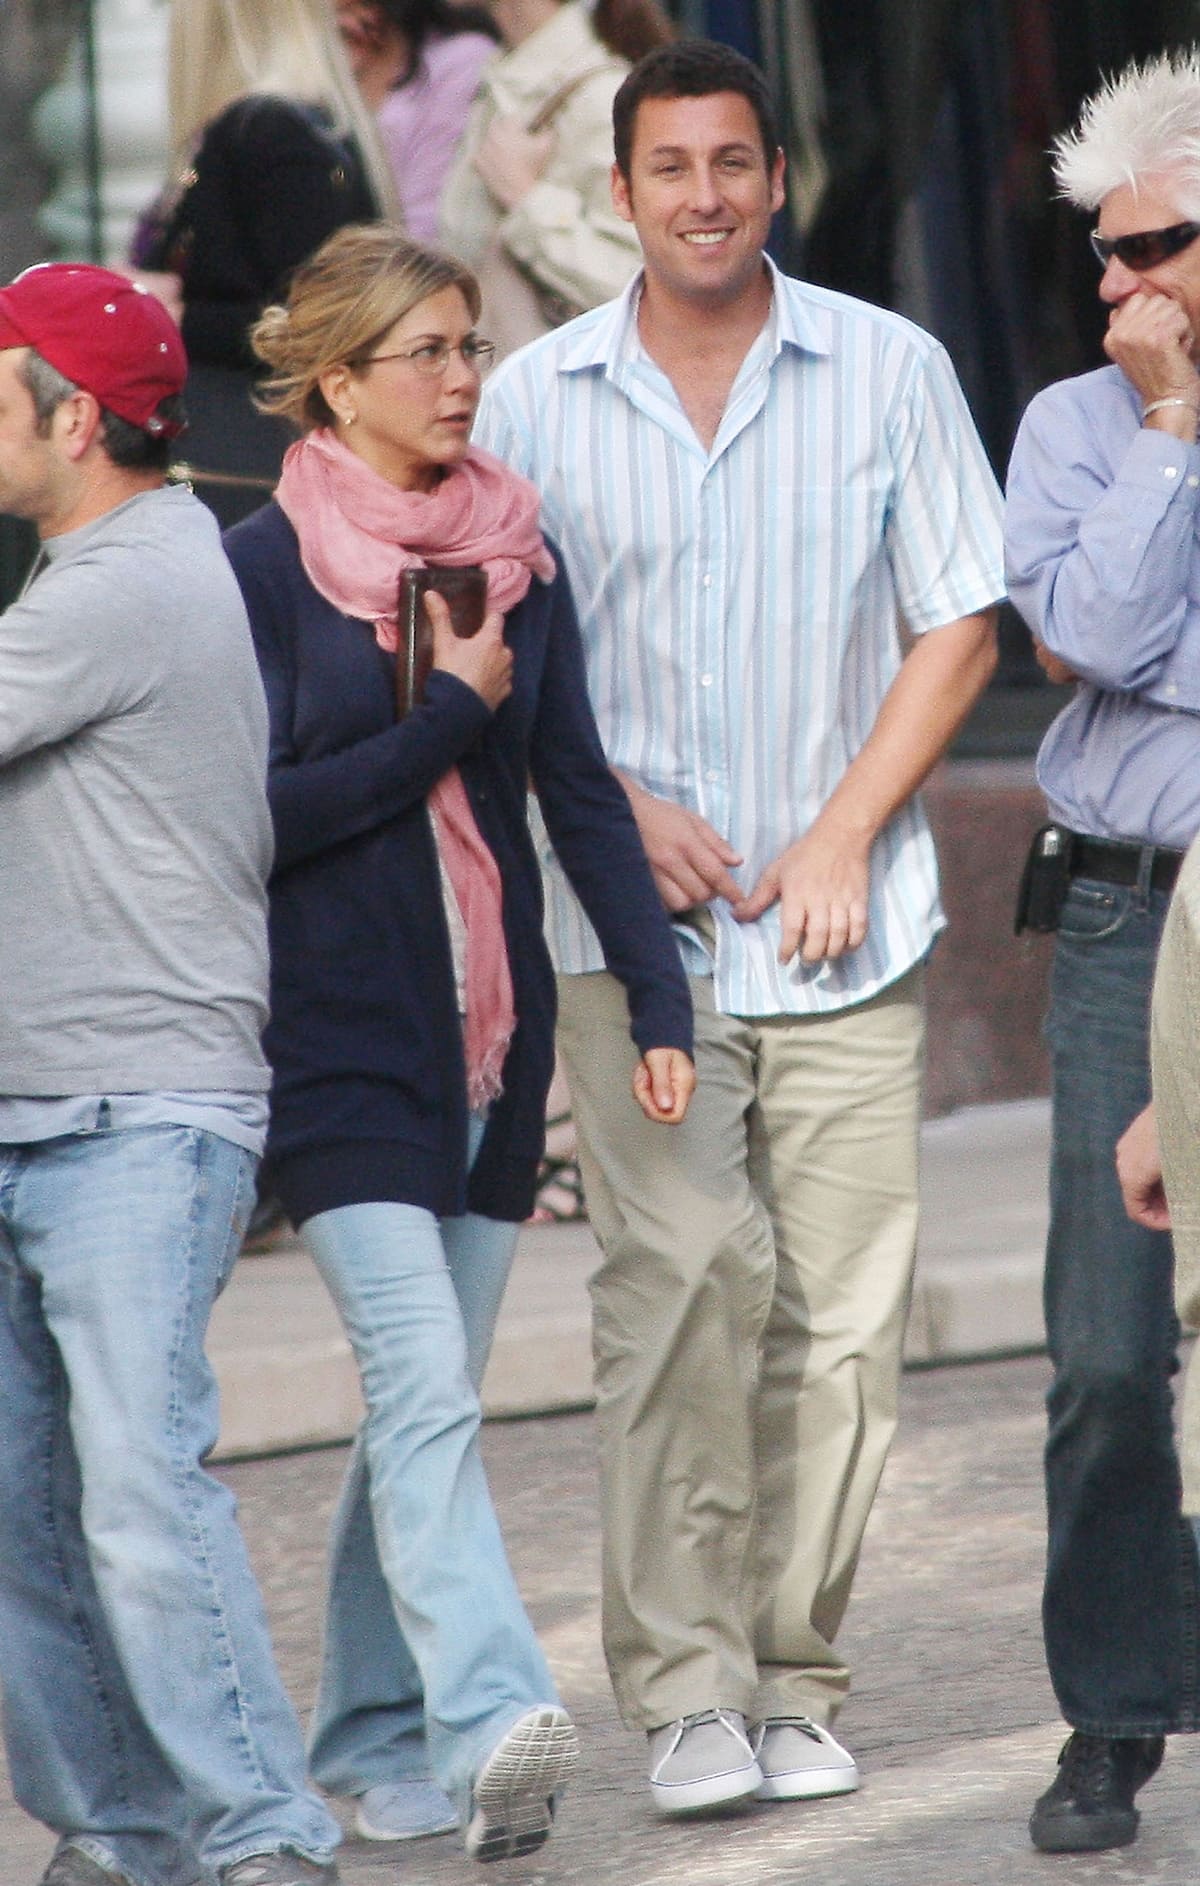 Jennifer Aniston and Adam Sandler filming their new movie 'Just Go With It' on Rodeo Drive